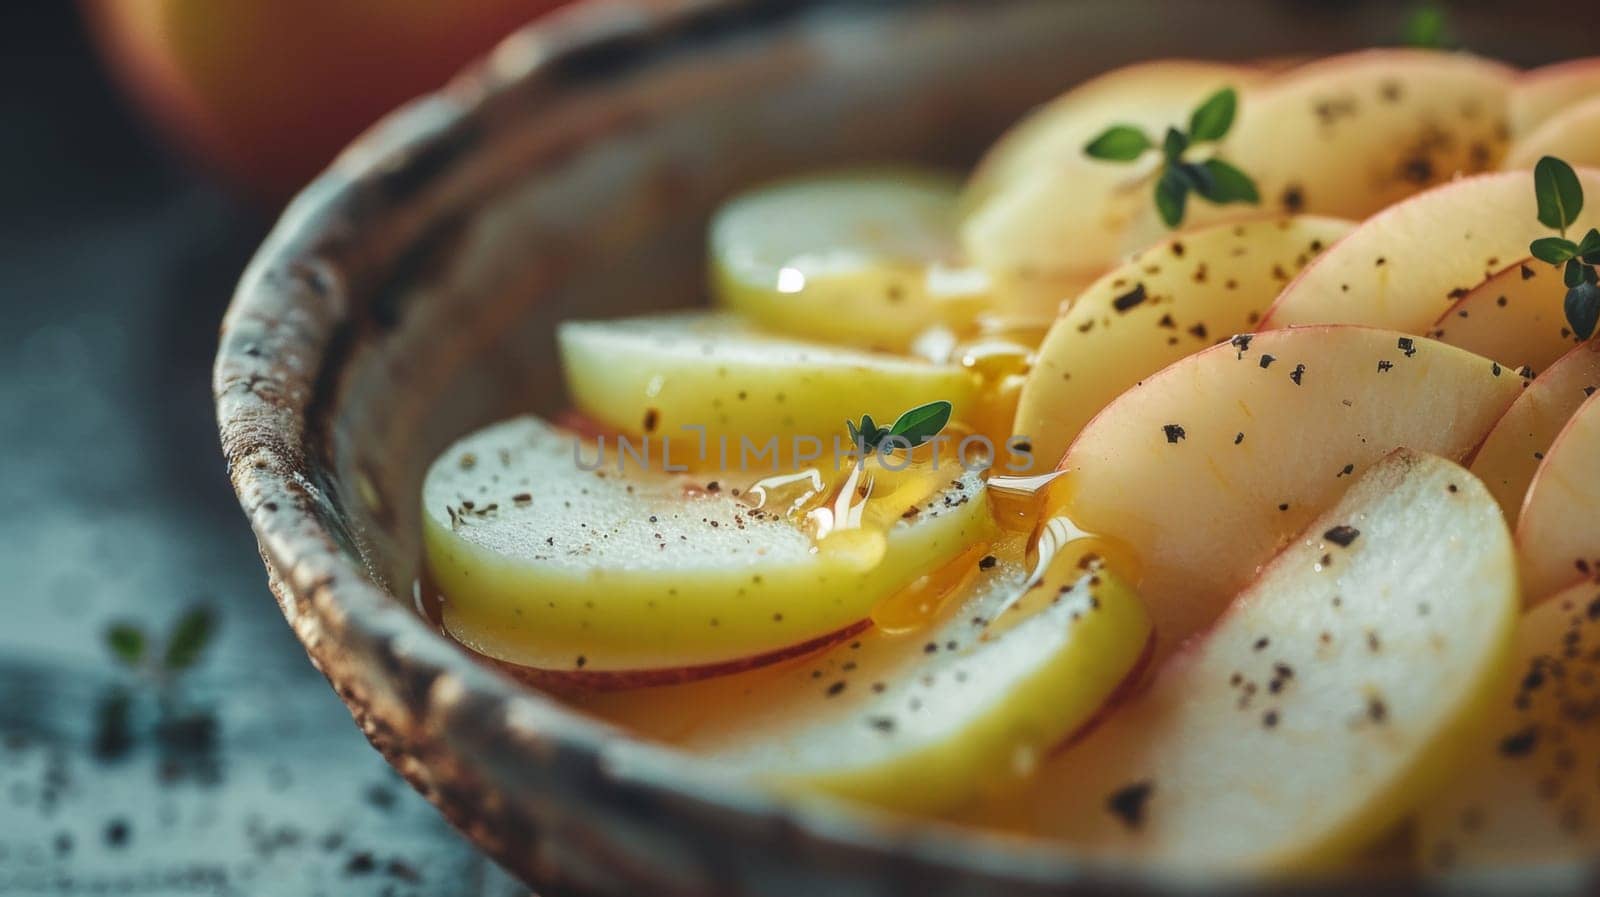 A close up of a bowl filled with sliced apples and herbs, AI by starush